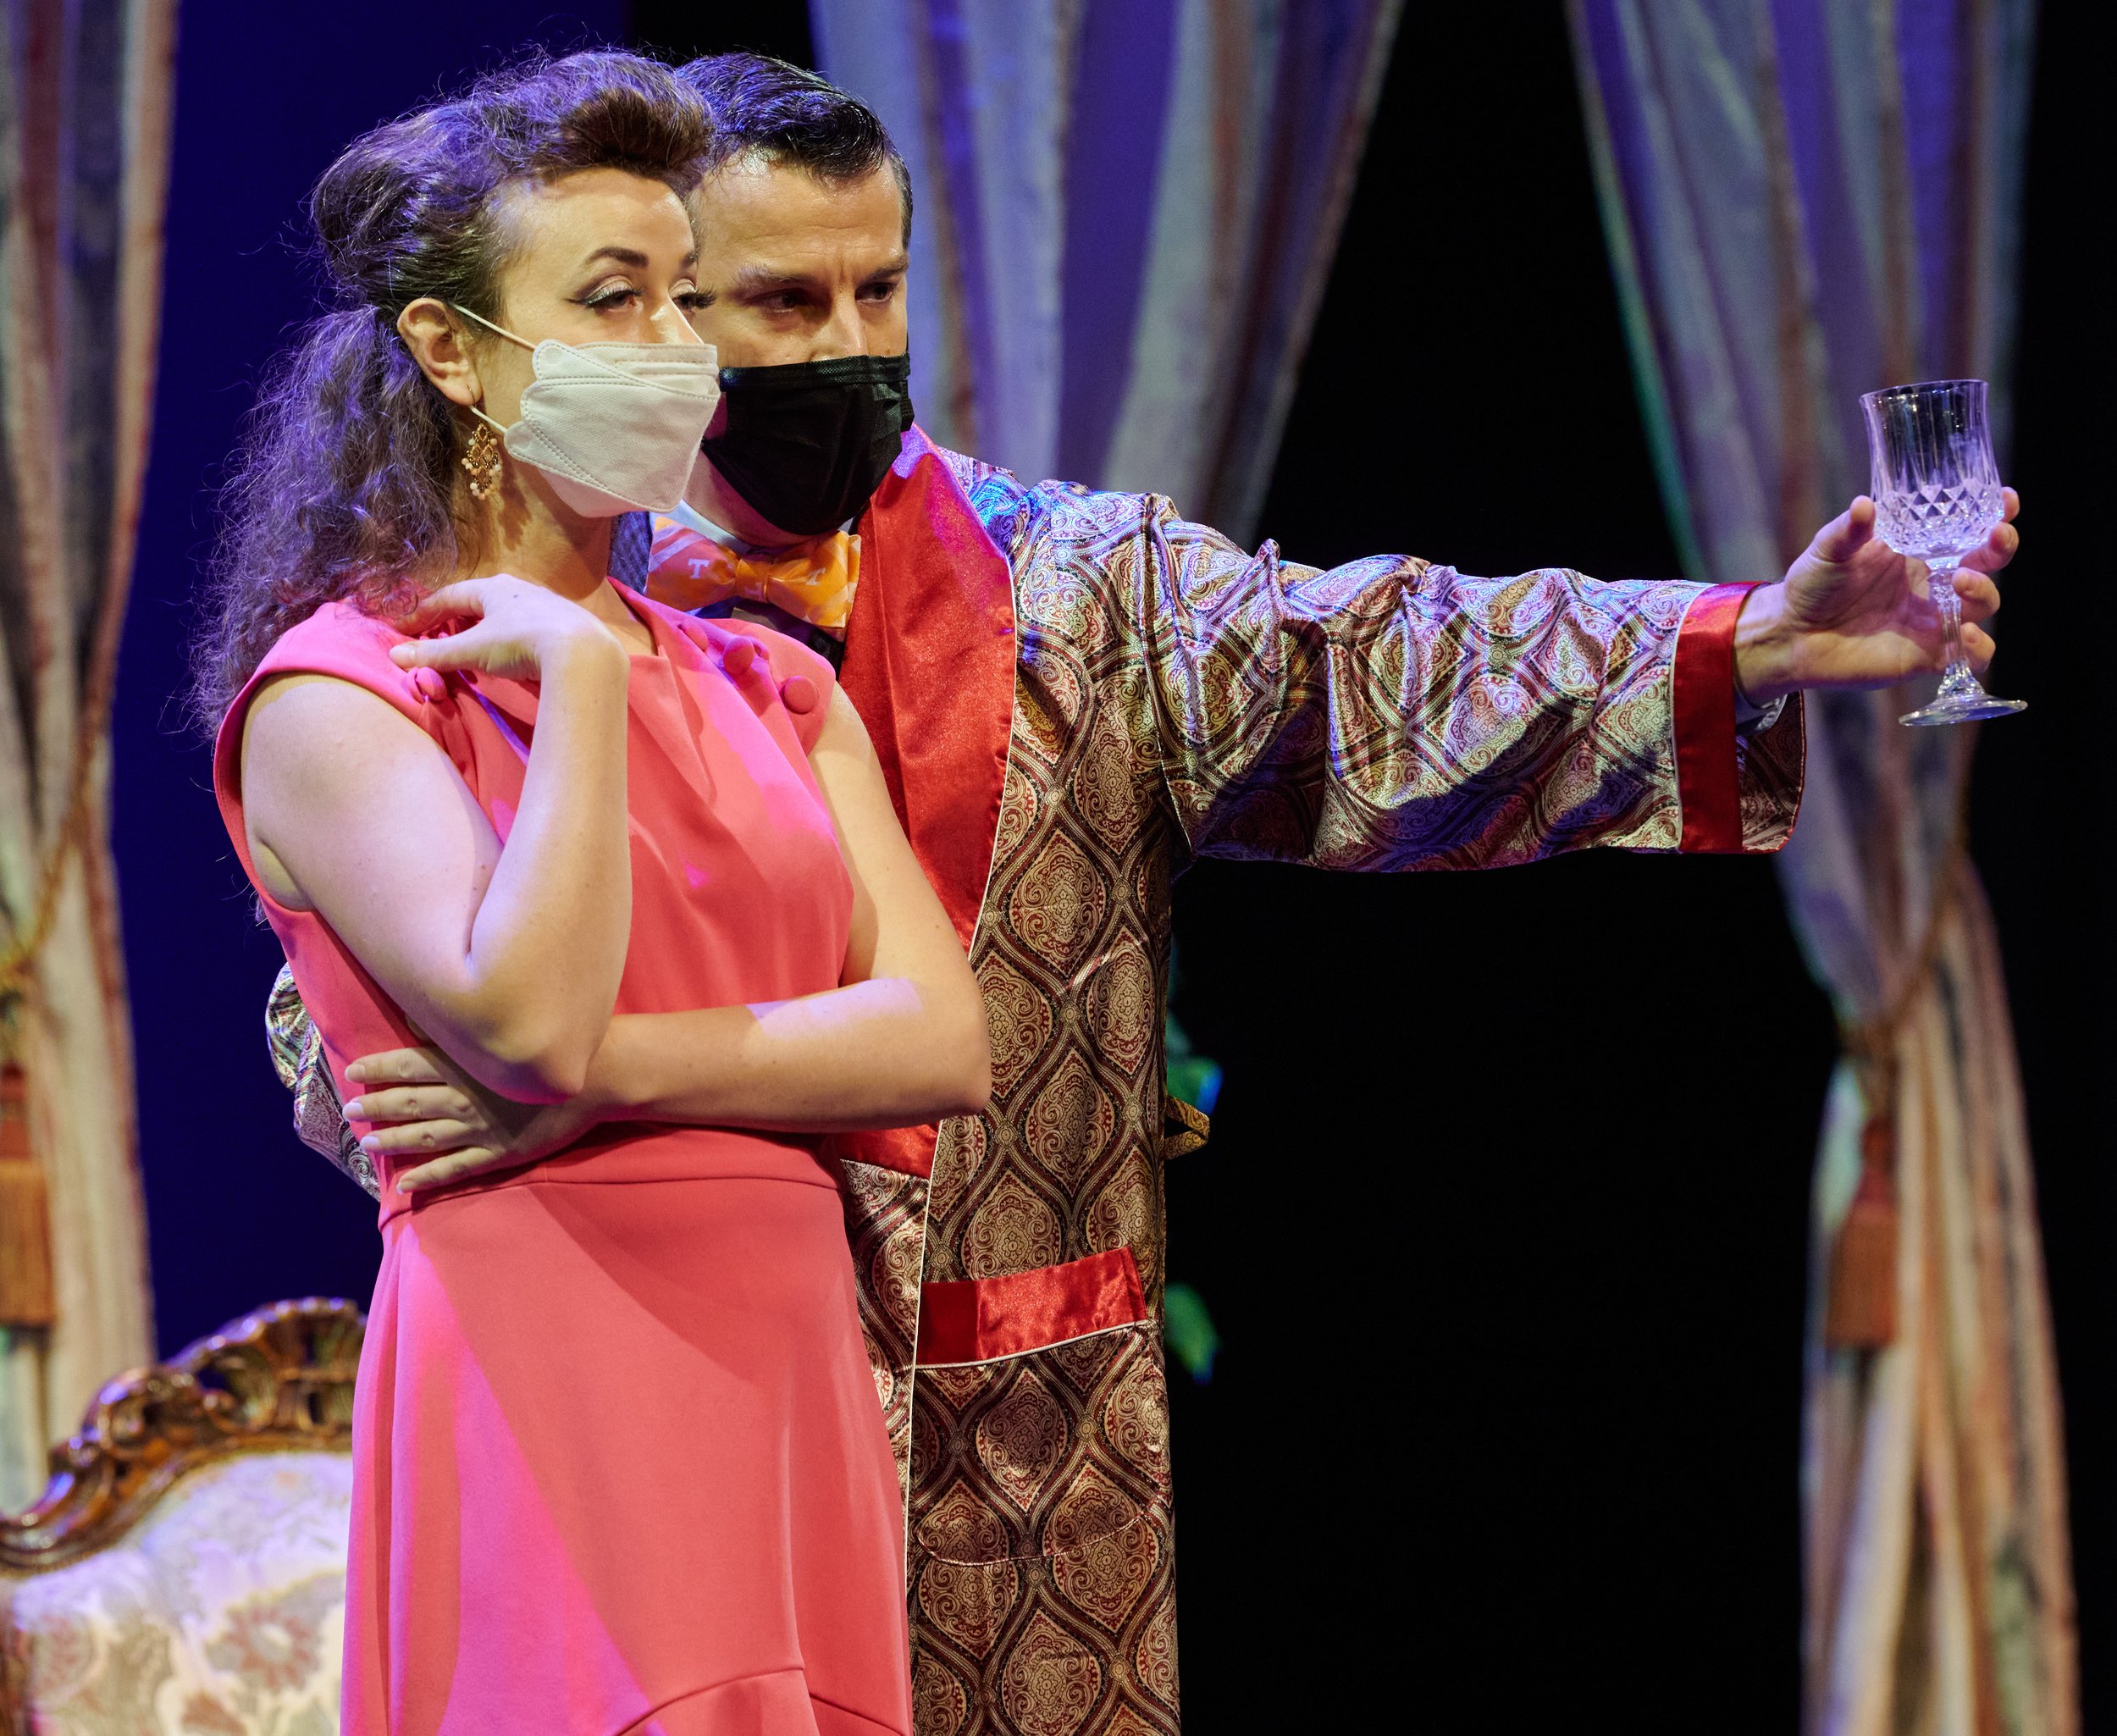  Ana Colesnicov and William Lyons during dress rehearsal of the Santa Monica College Opera Theatre production of "Die Fledermaus" at The Broad Stage on Wednesday, May 18, 2022, in Santa Monica, Calif. (Nicholas McCall | The Corsair) 